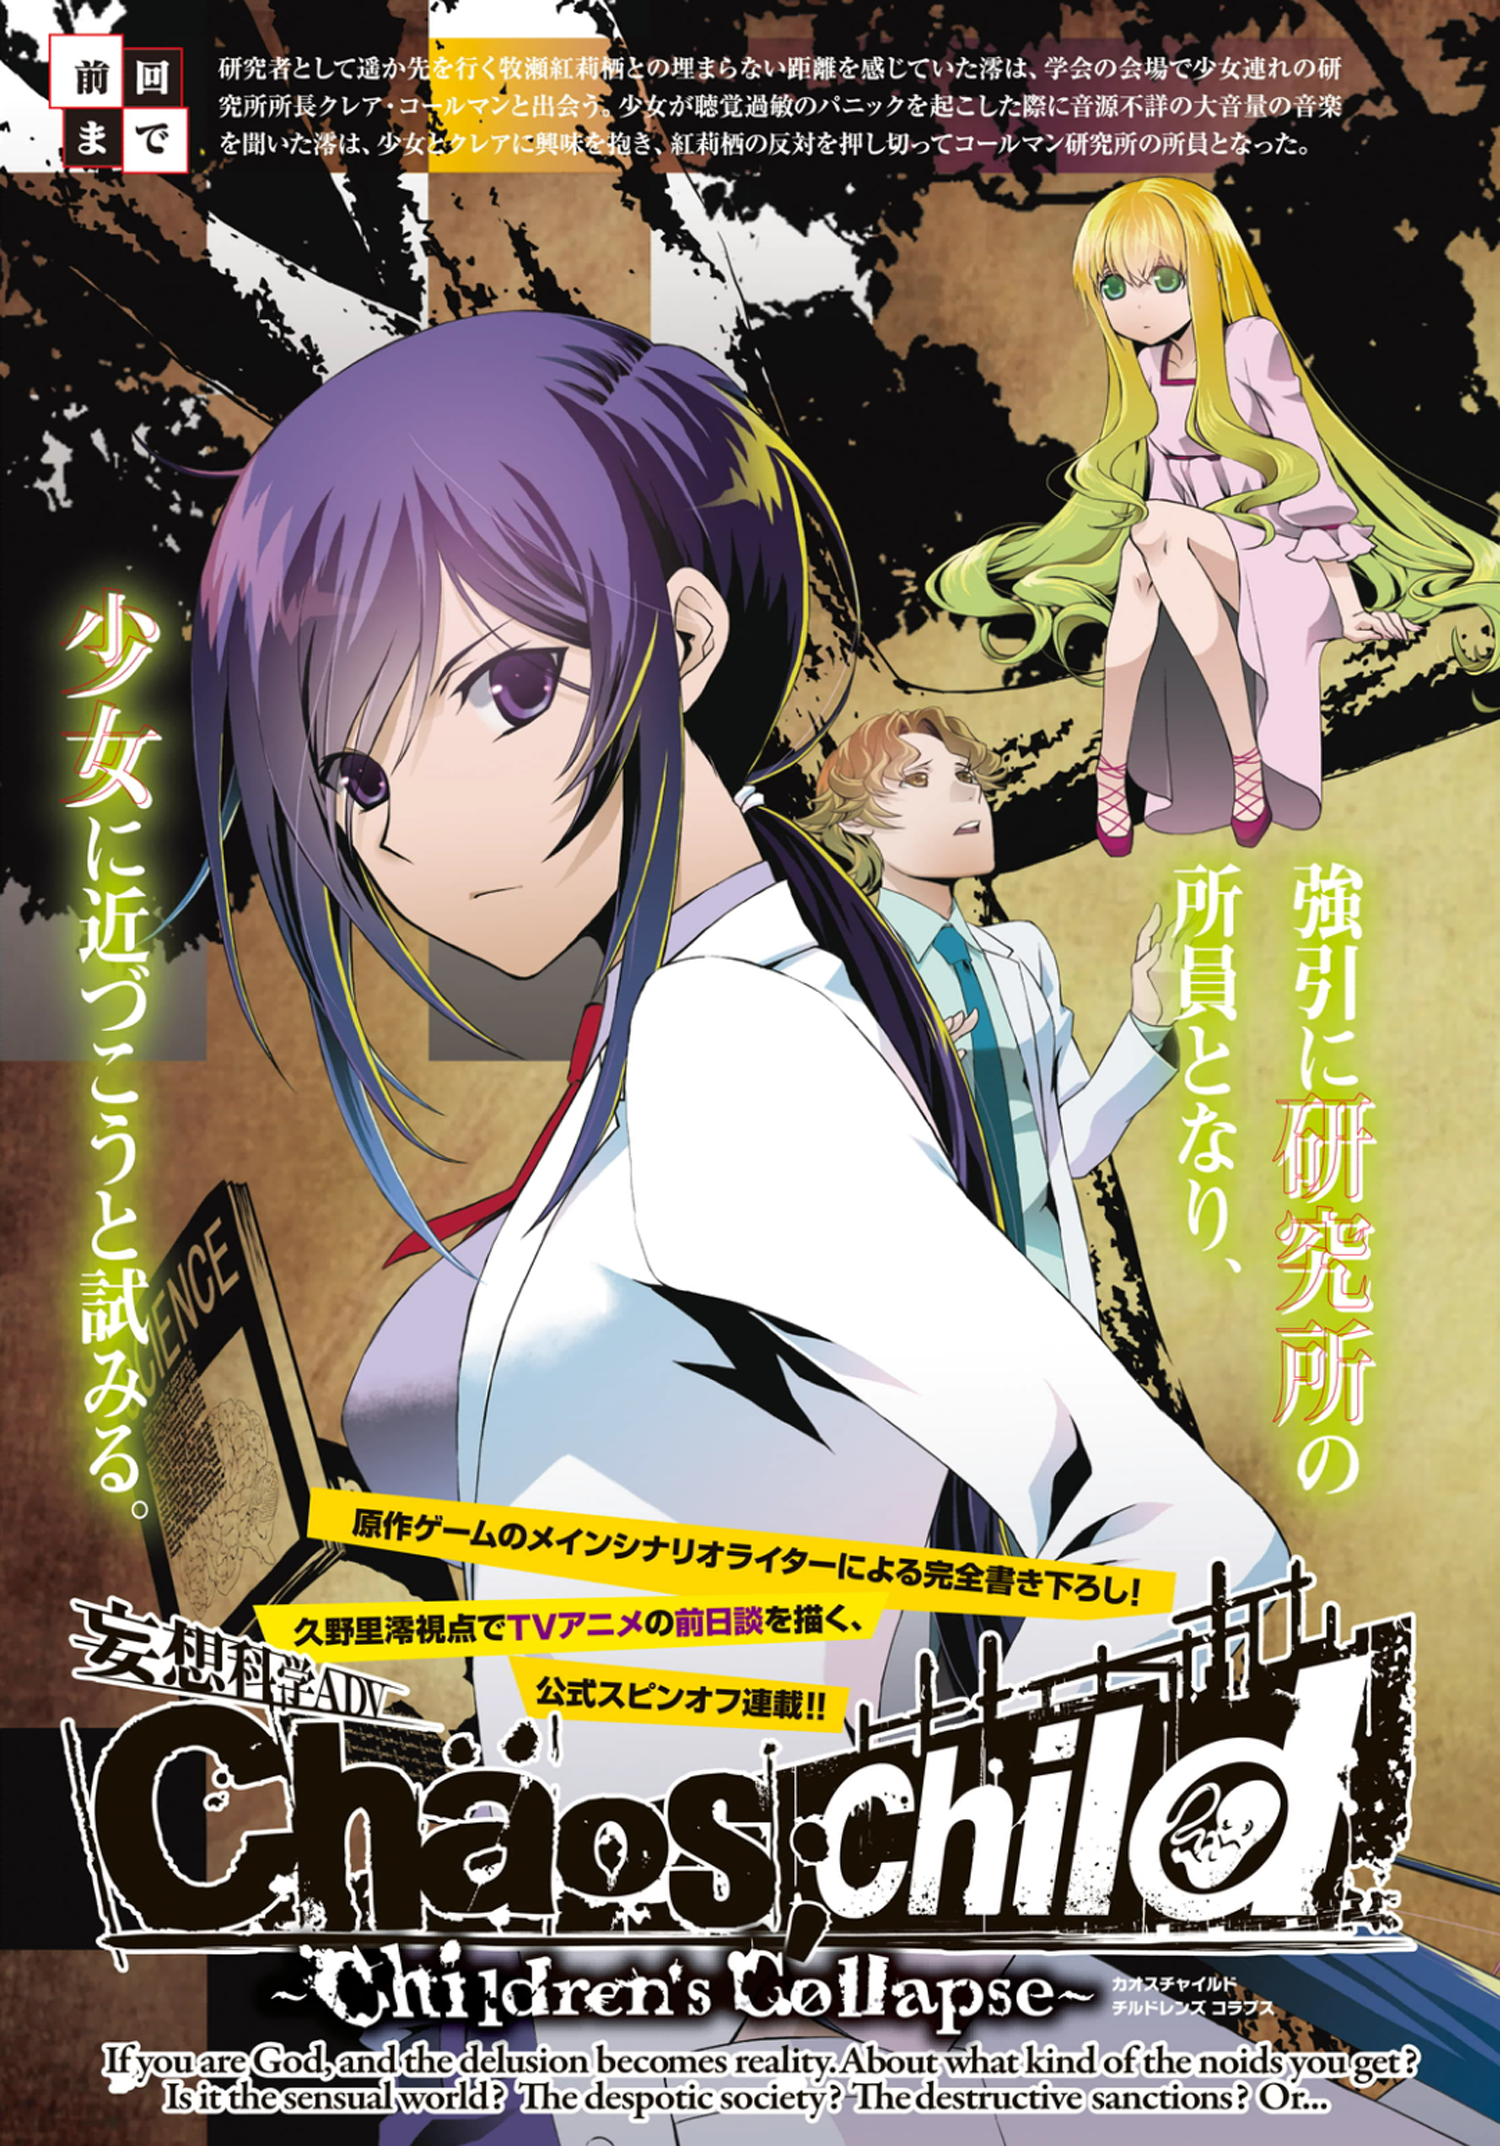 Chaos;child ～Children's Collapse～ Vol.1 Chapter 5